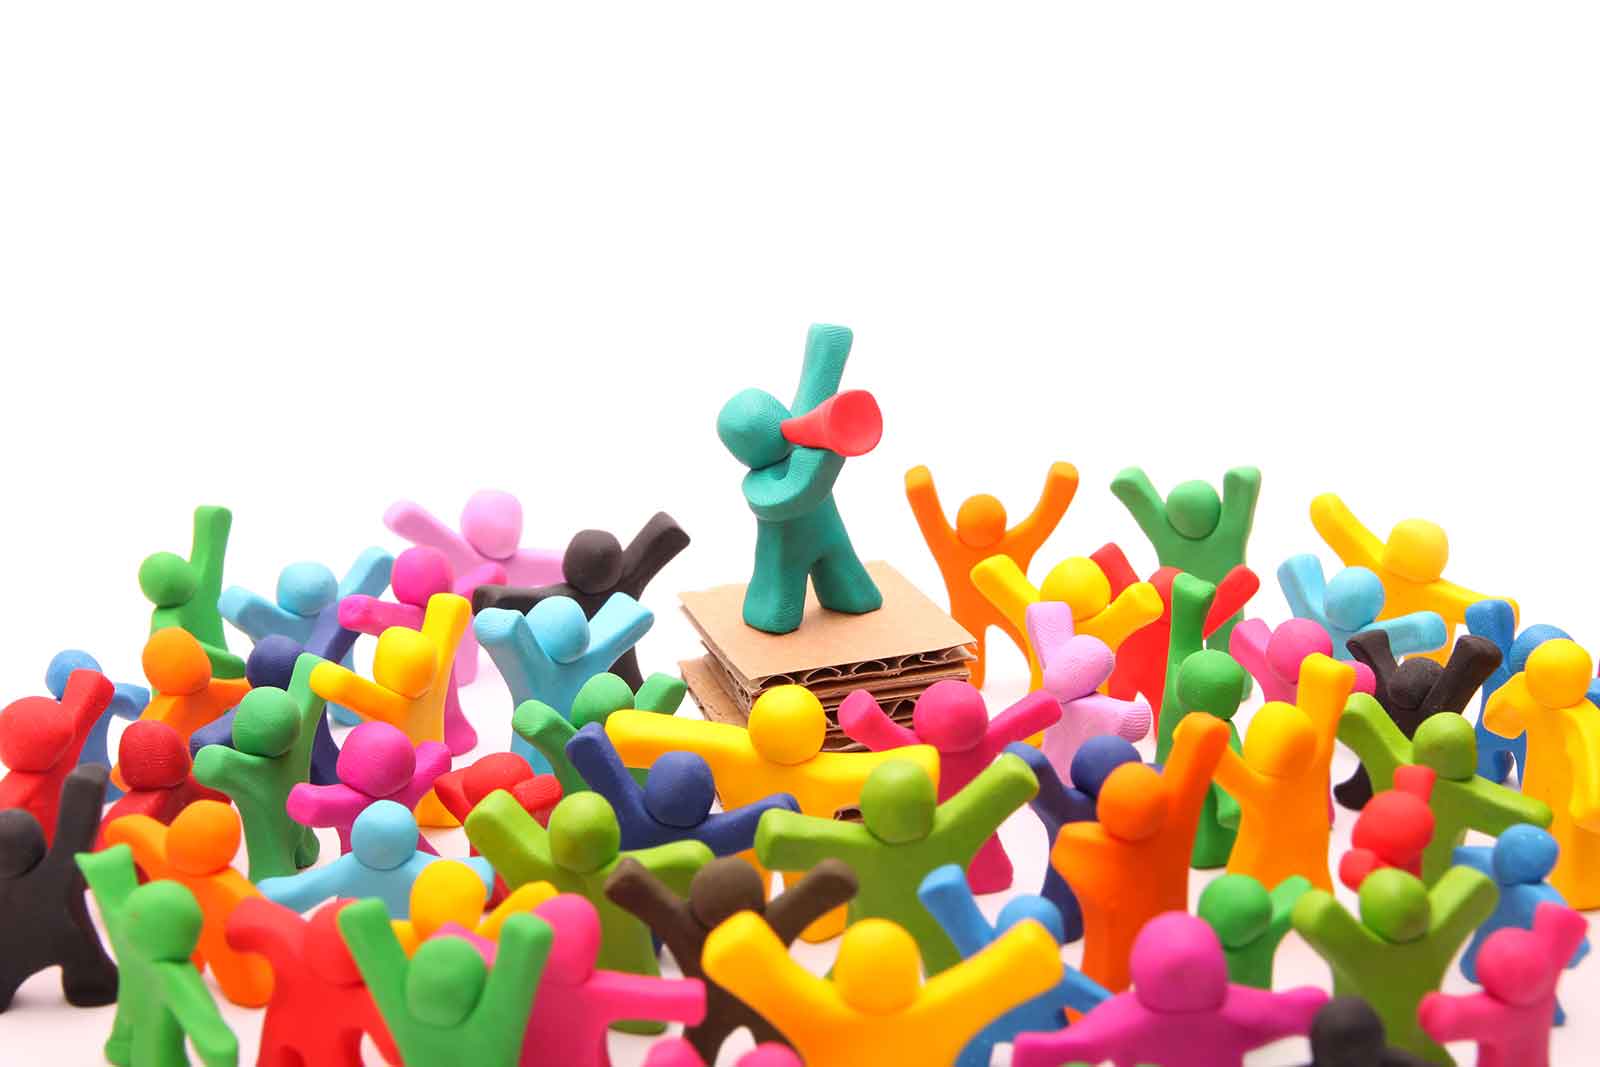 A group of gumby-like plastic figures stand around listening to another gumby-like figure talking through a megaphone. This is symbolising branded content and brand journalism. Hey, it's not an easy subject to find a good image for!